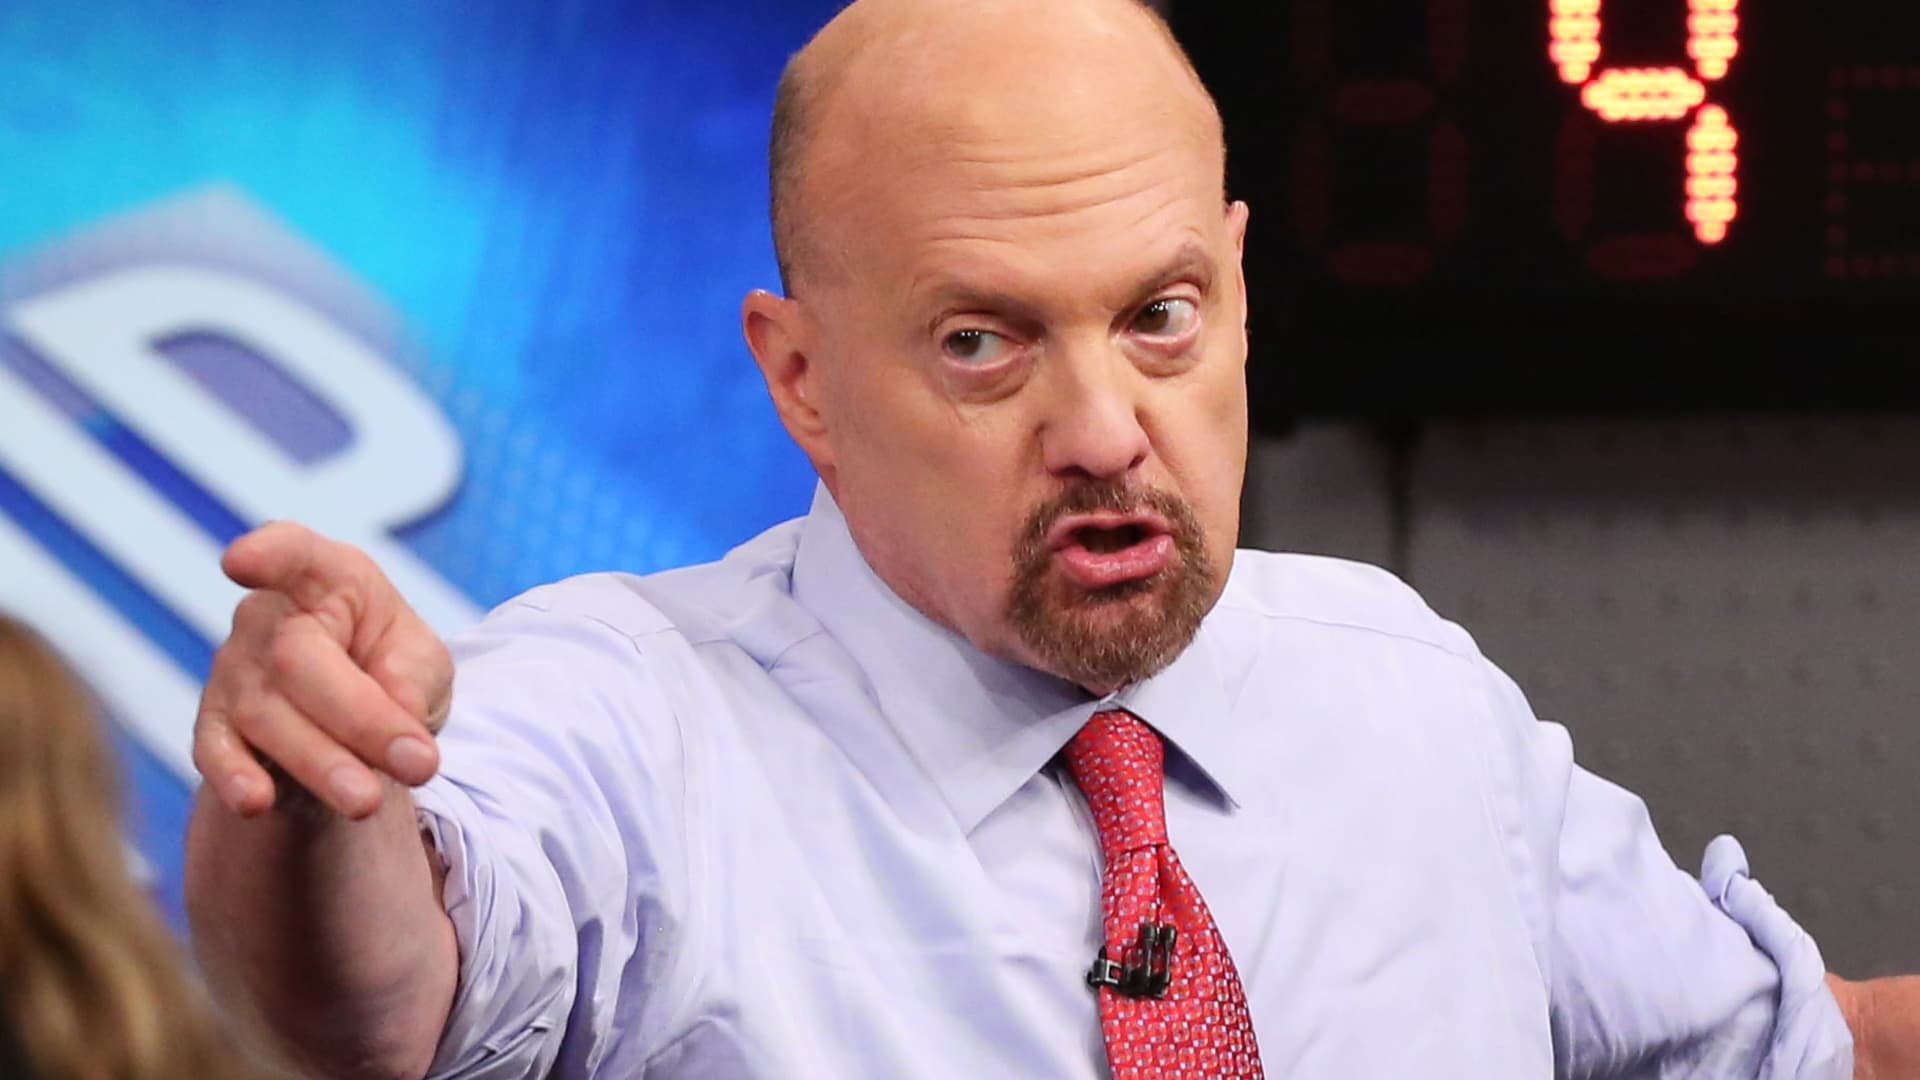 Jim Cramer says to consider buying these 8 stocks now that commodity prices are down